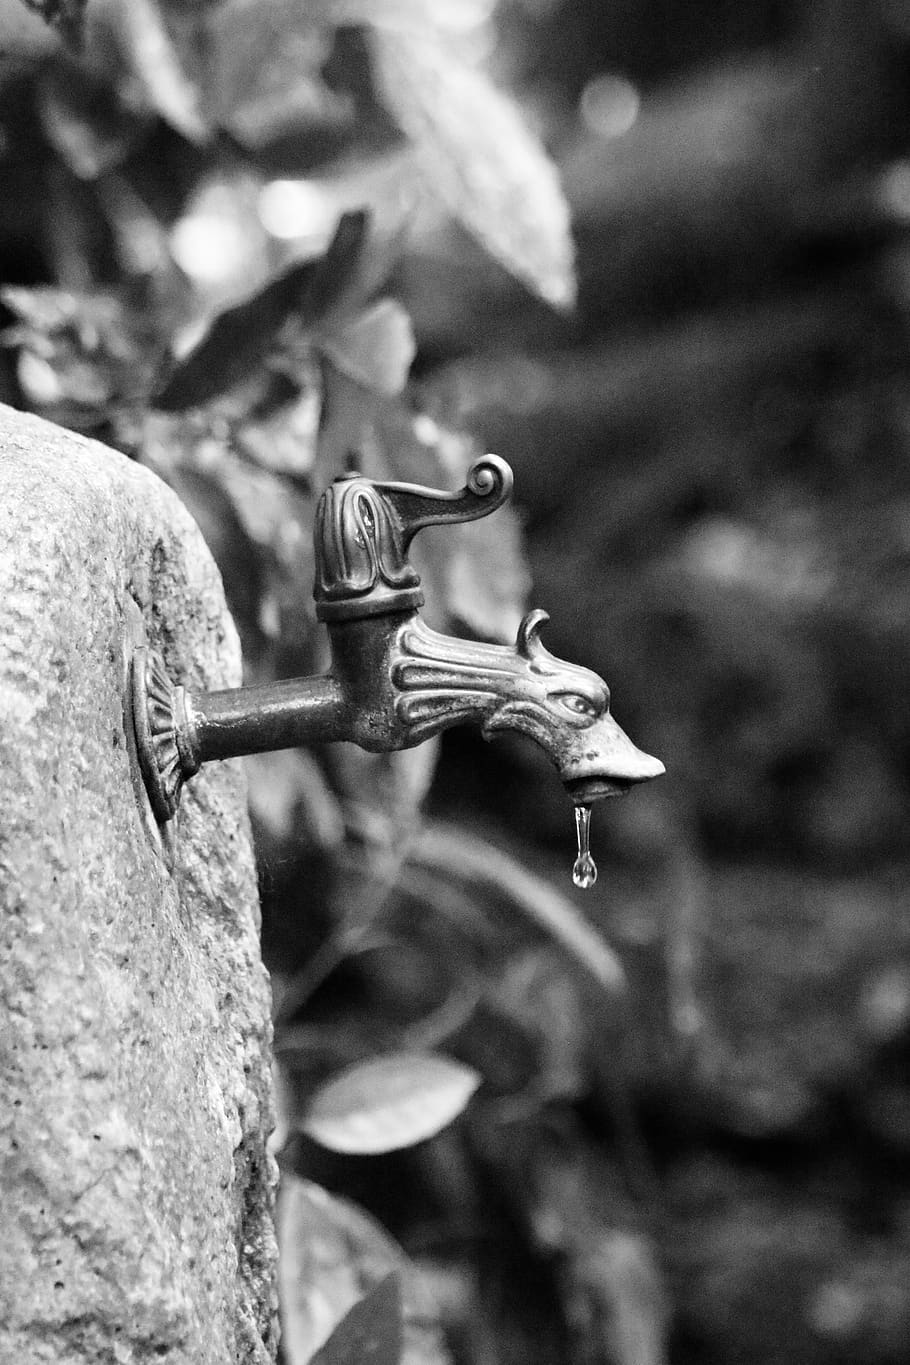 faucet, old, well water, dripping, water, tap, metal, drop, rusty, valve